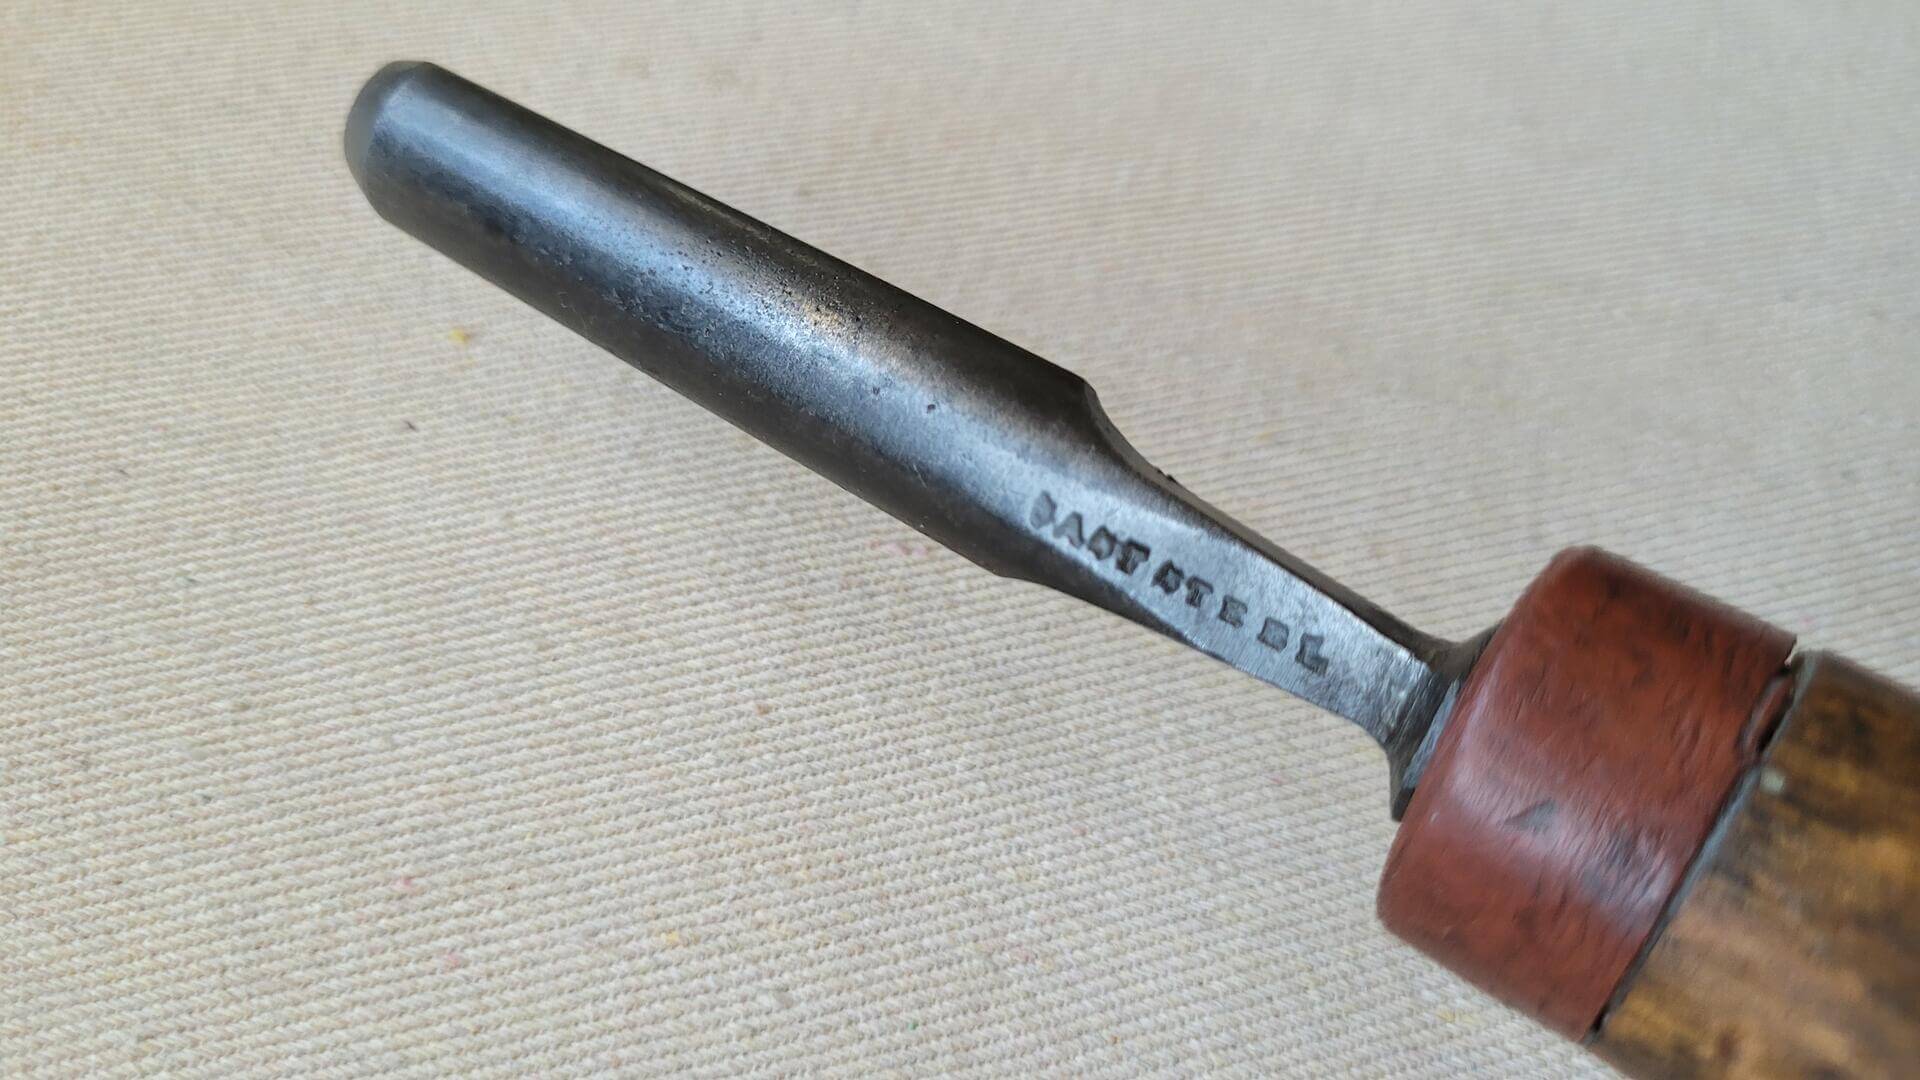 Nice vintage Hearnshaw Bros 1/2" pairing gouge chisel. Rare antique made in Sheffield England collectible carpentry and woodworking wood carving hand tool